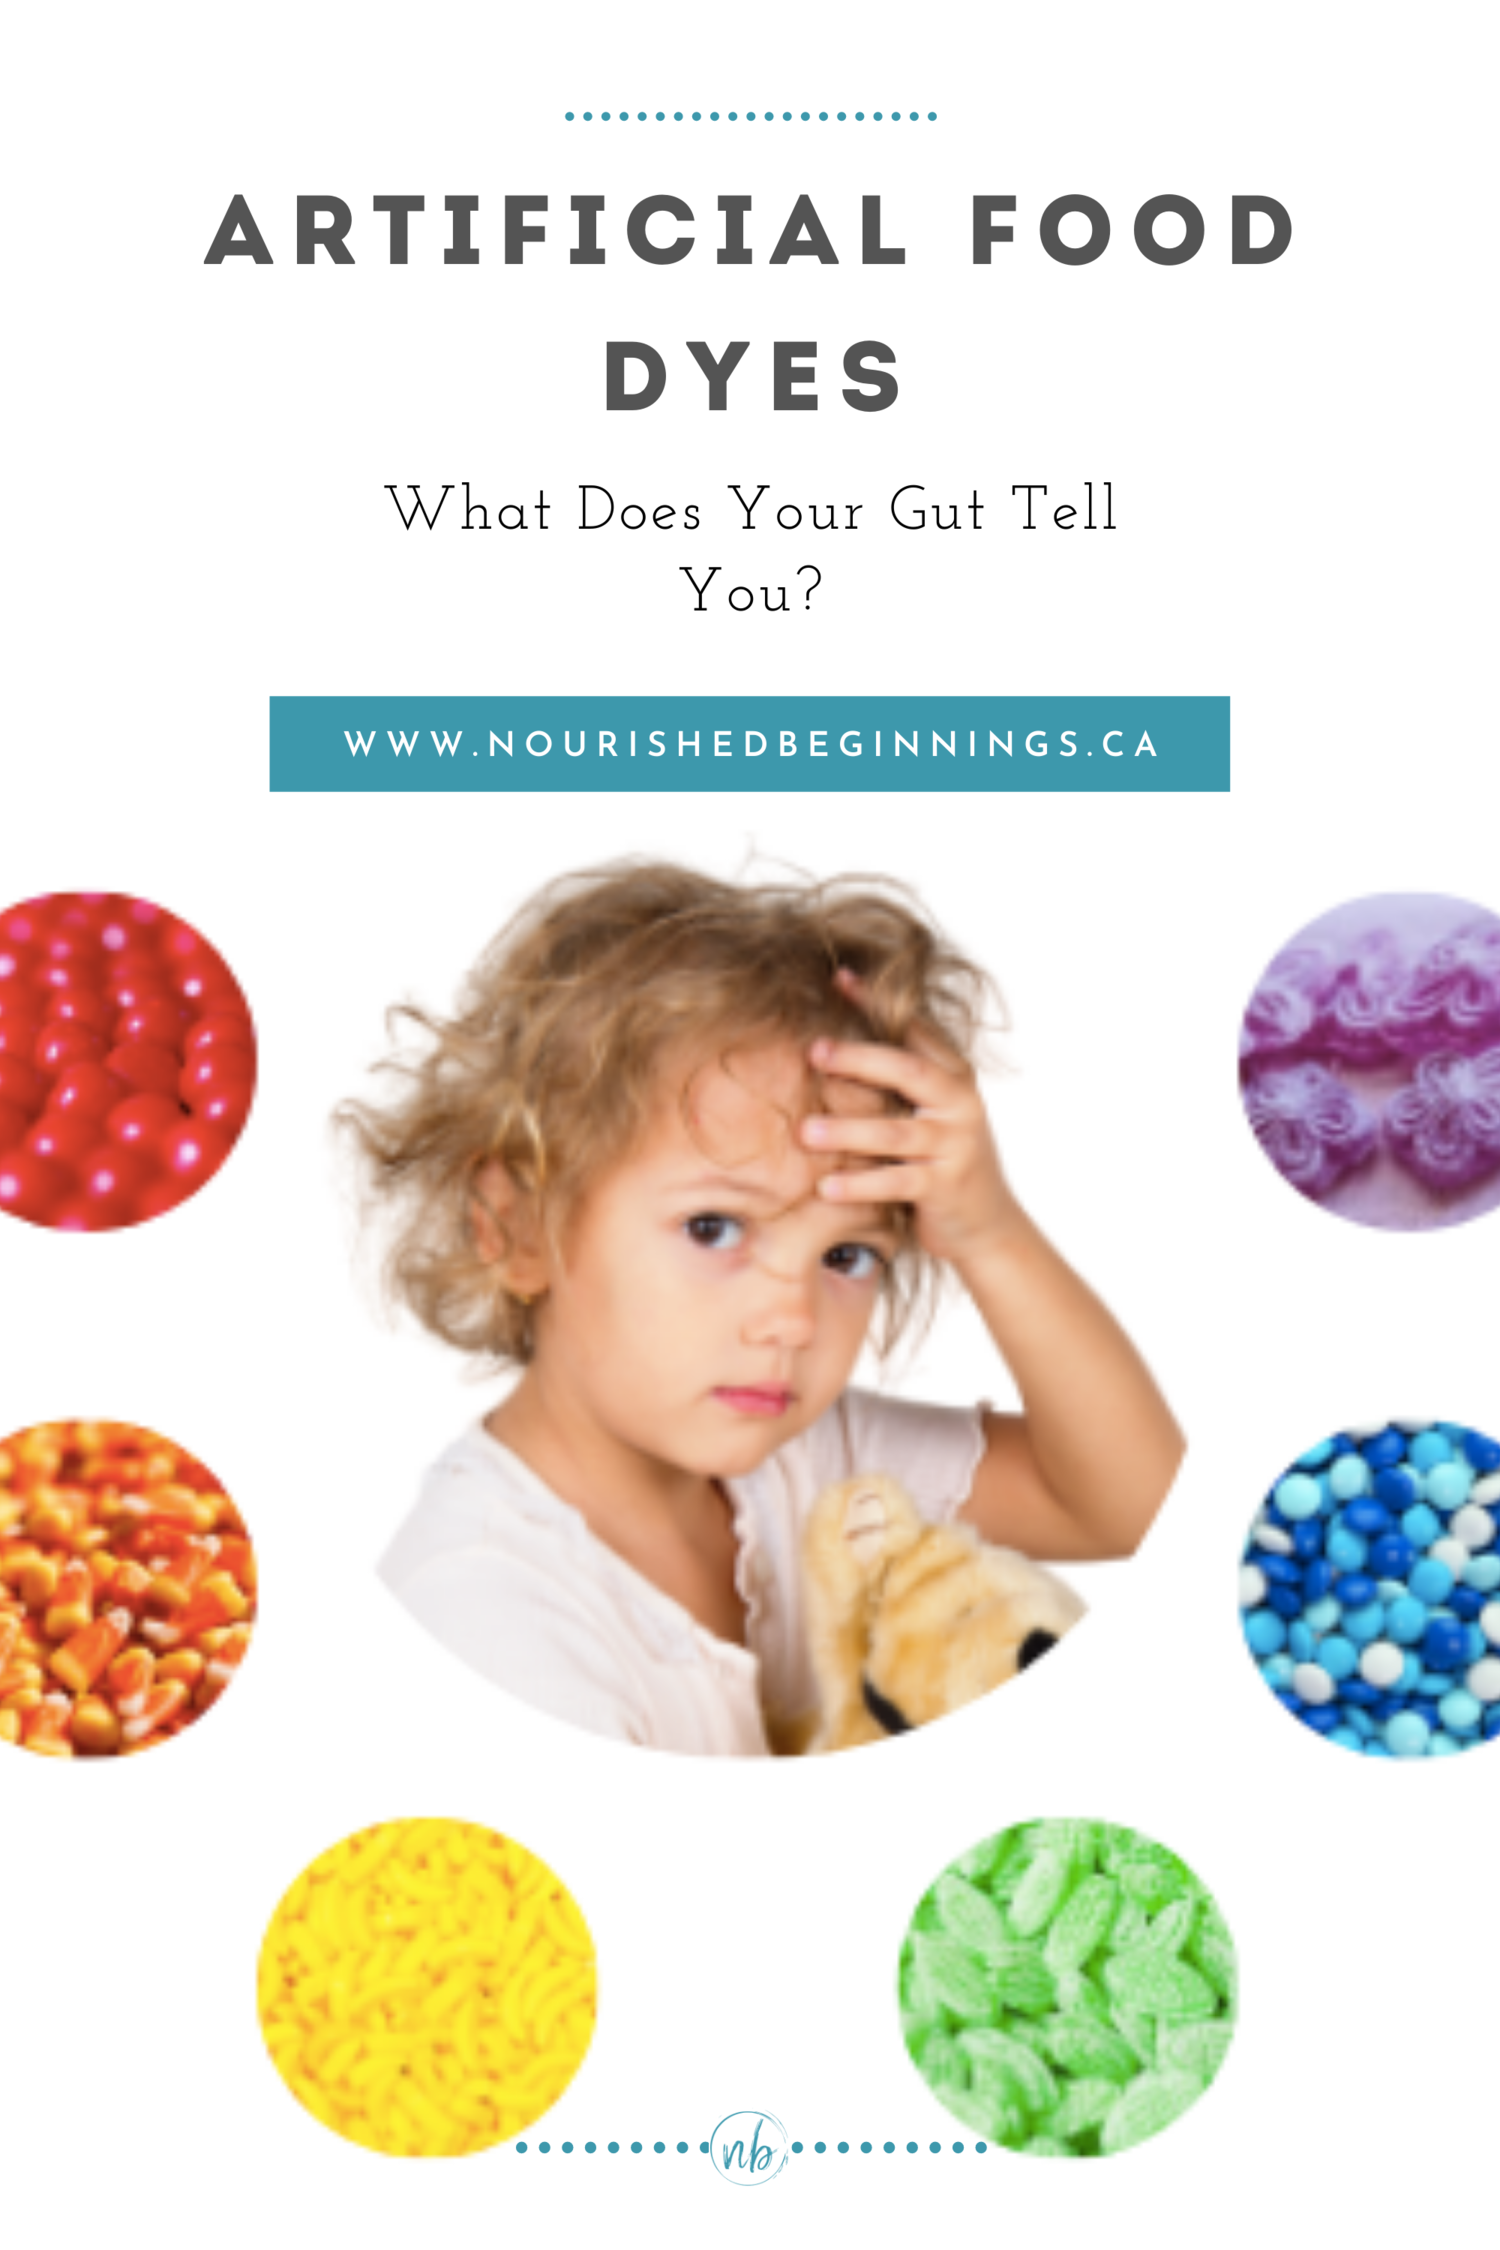 Artificial Food Dyes. What Does Your Gut Tell You? — Nourished Beginnings